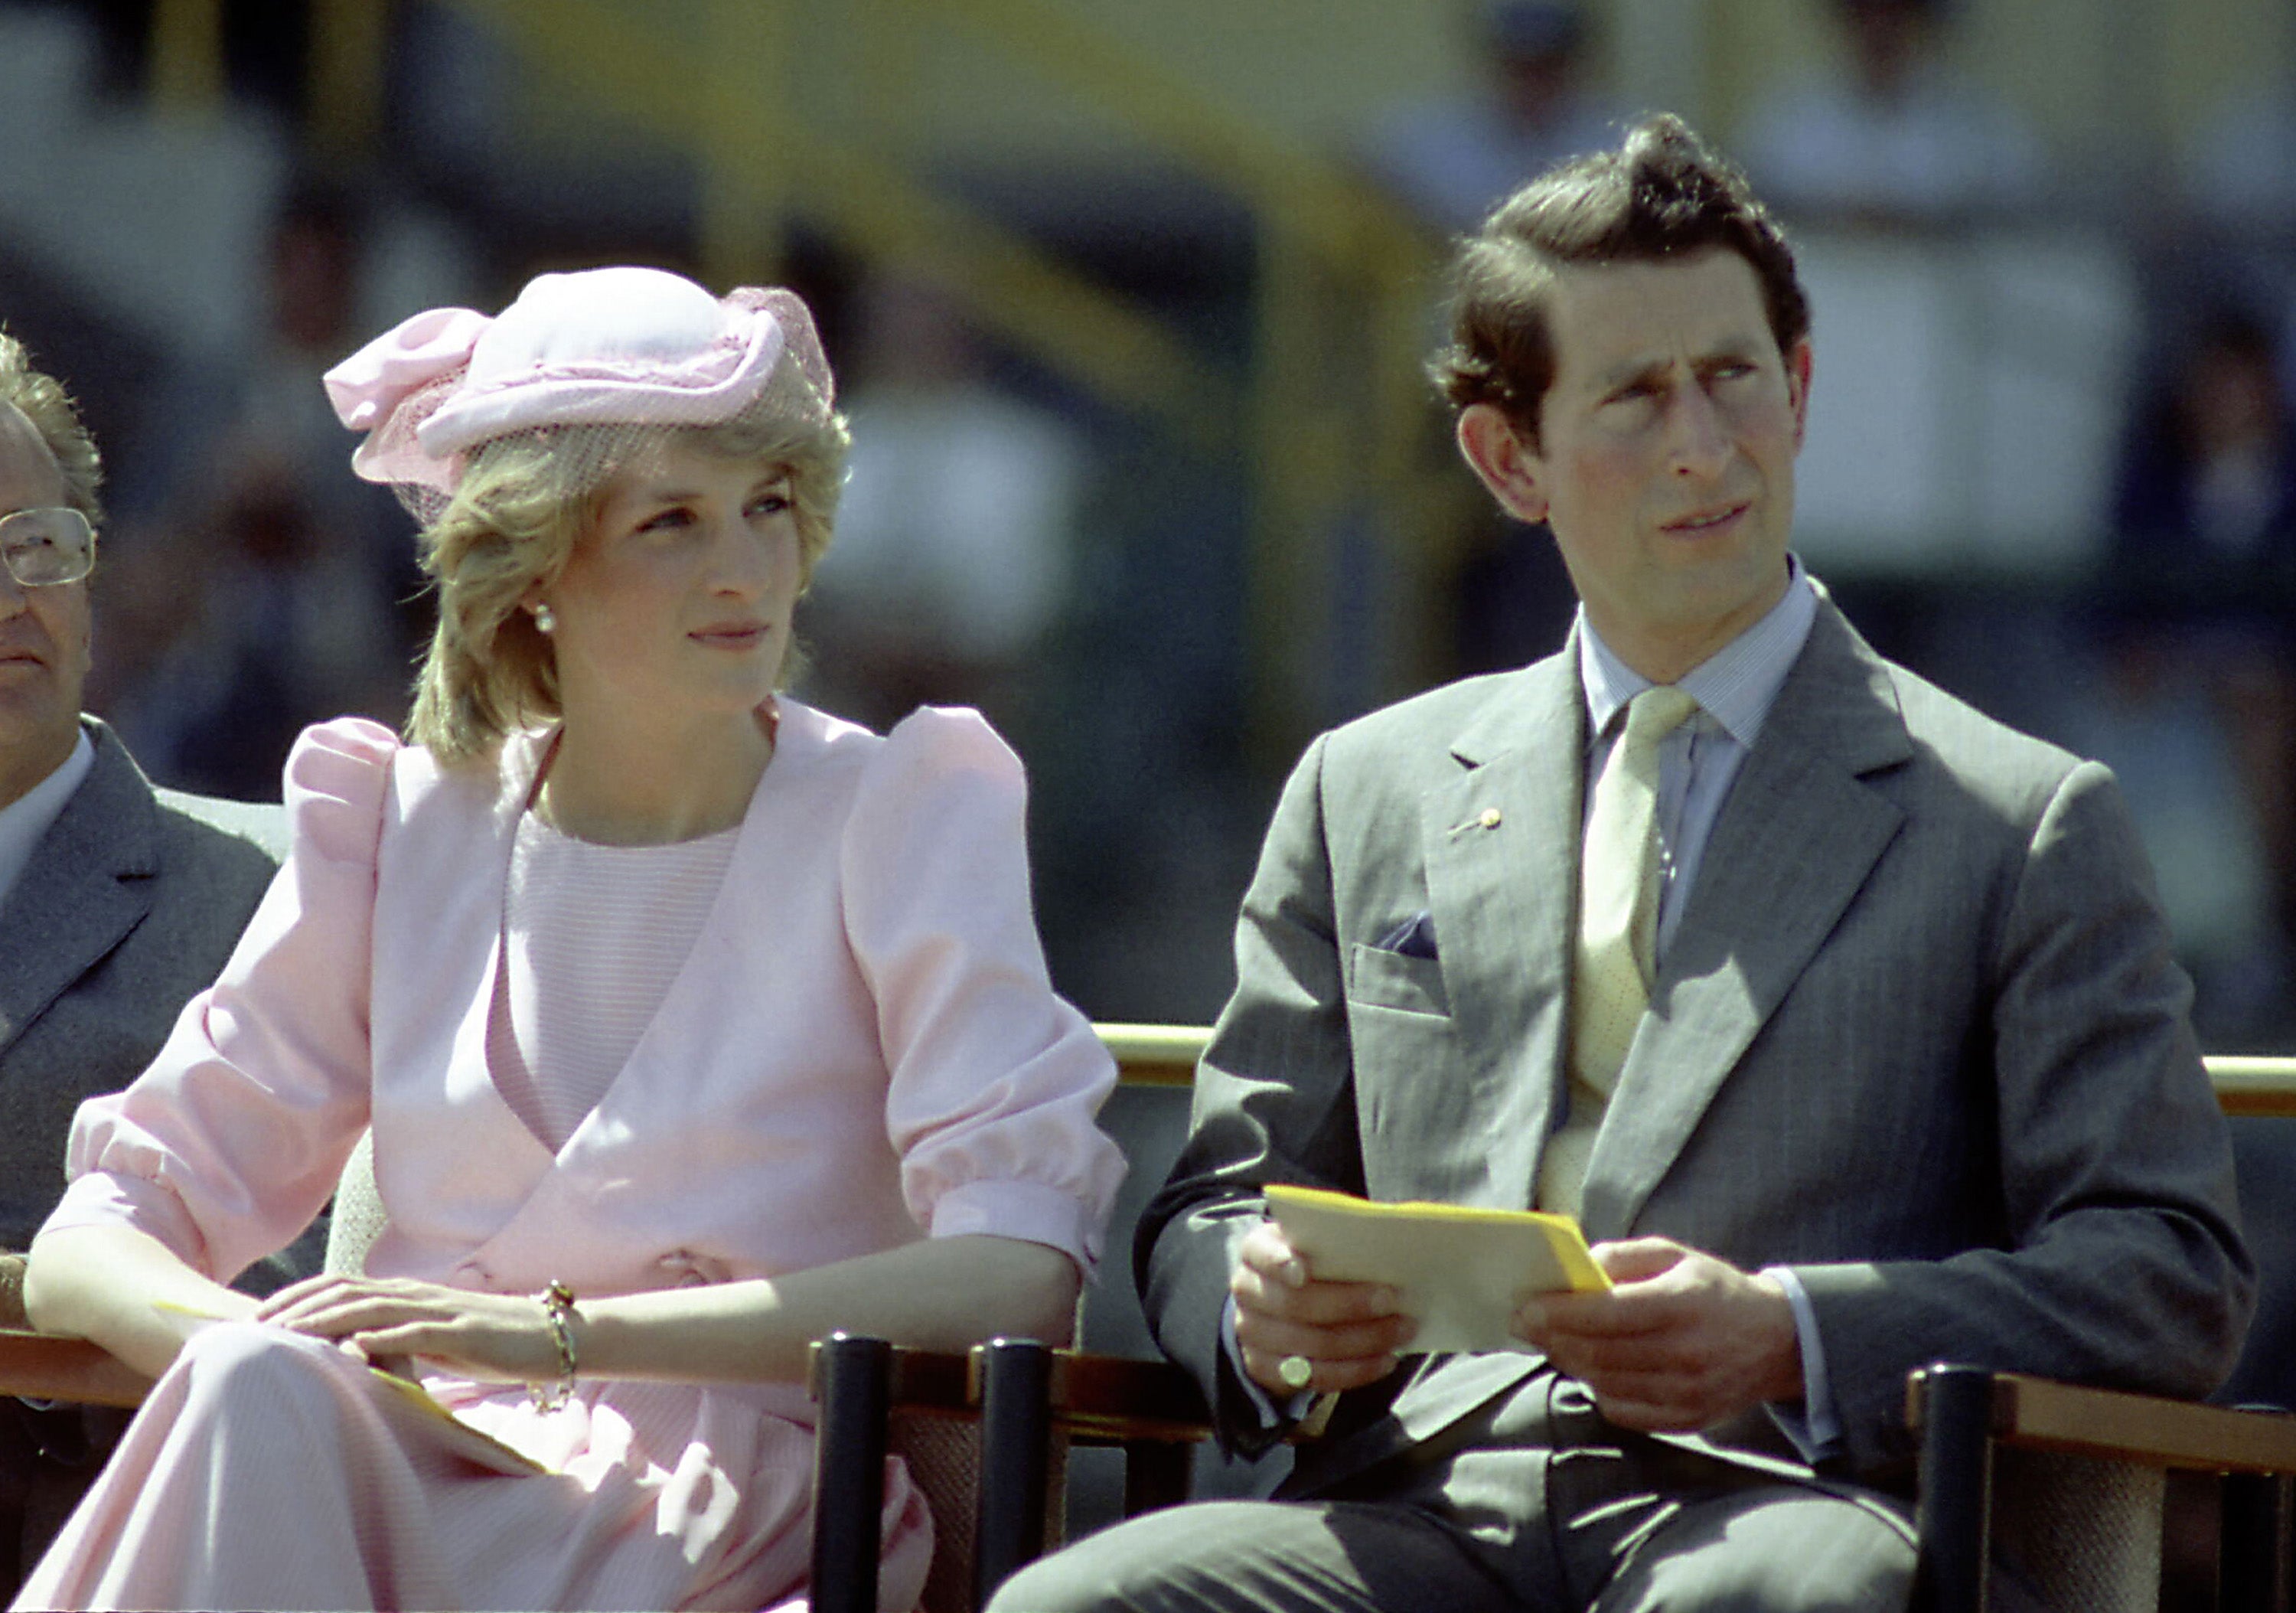 Charles and Diana’s divorce was ‘big news for the tabloid newspapers’, the trial has heard